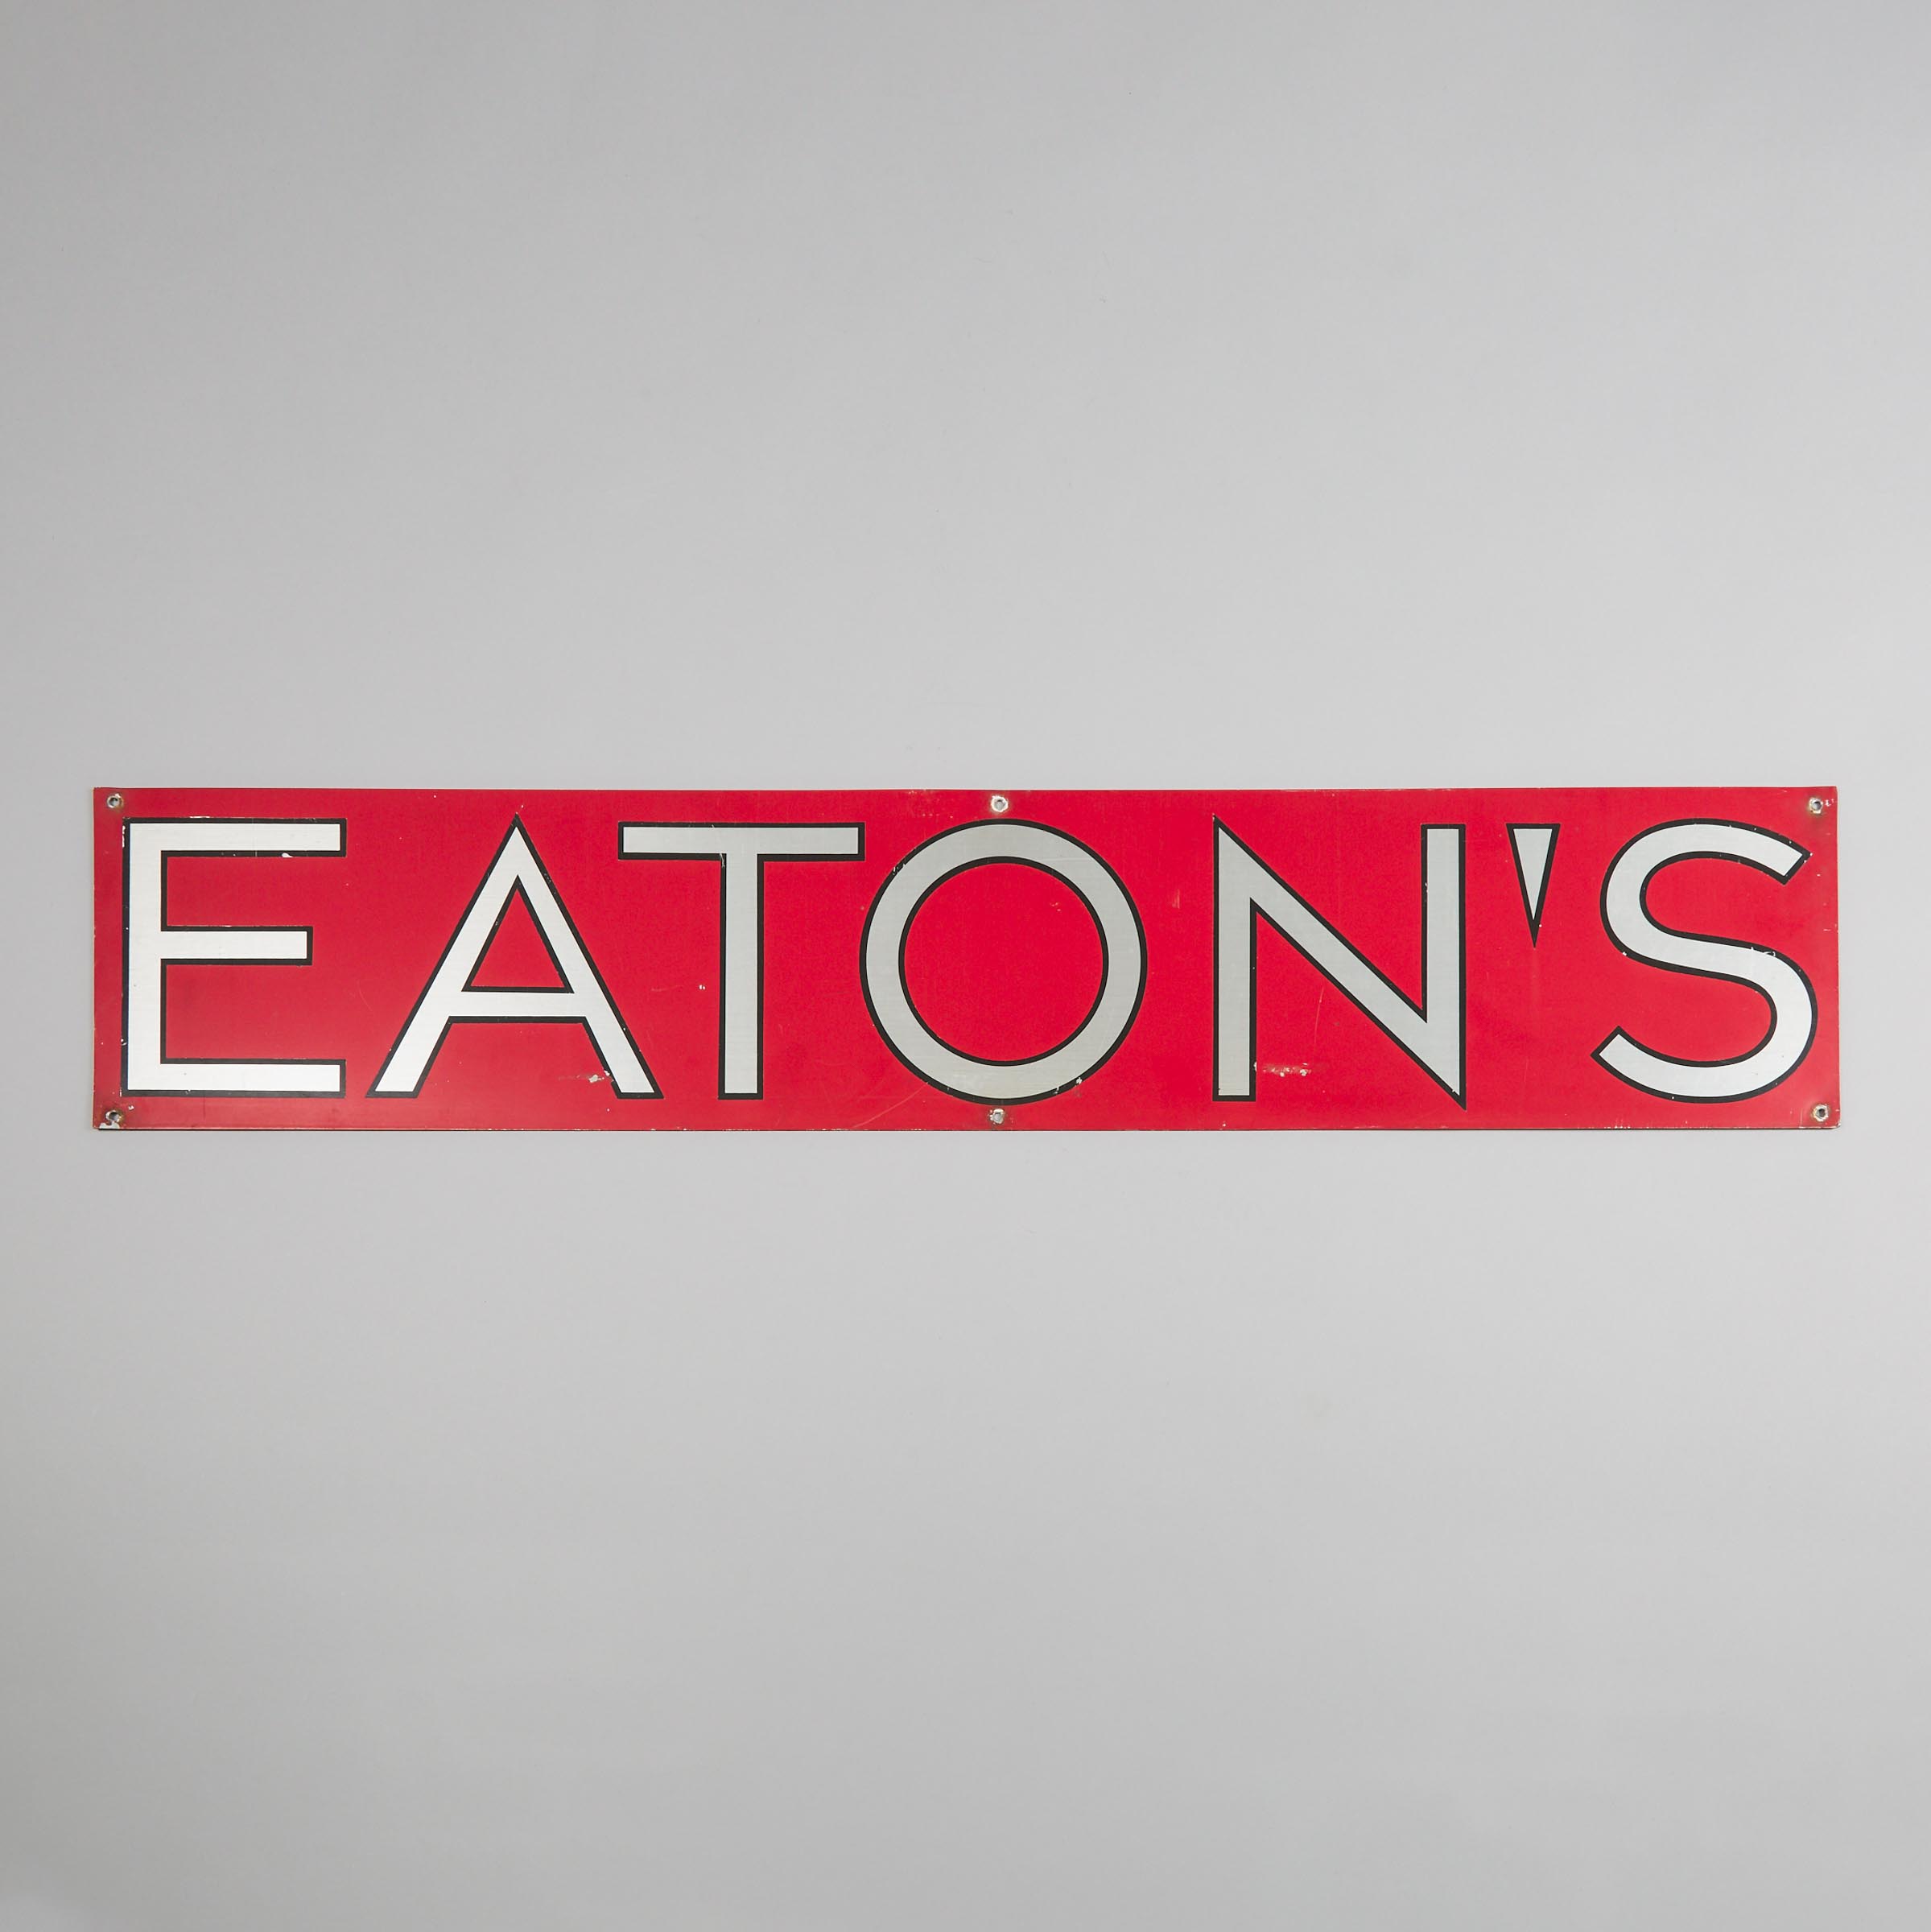 Eaton's Delivery Truck Sign, late 20th century